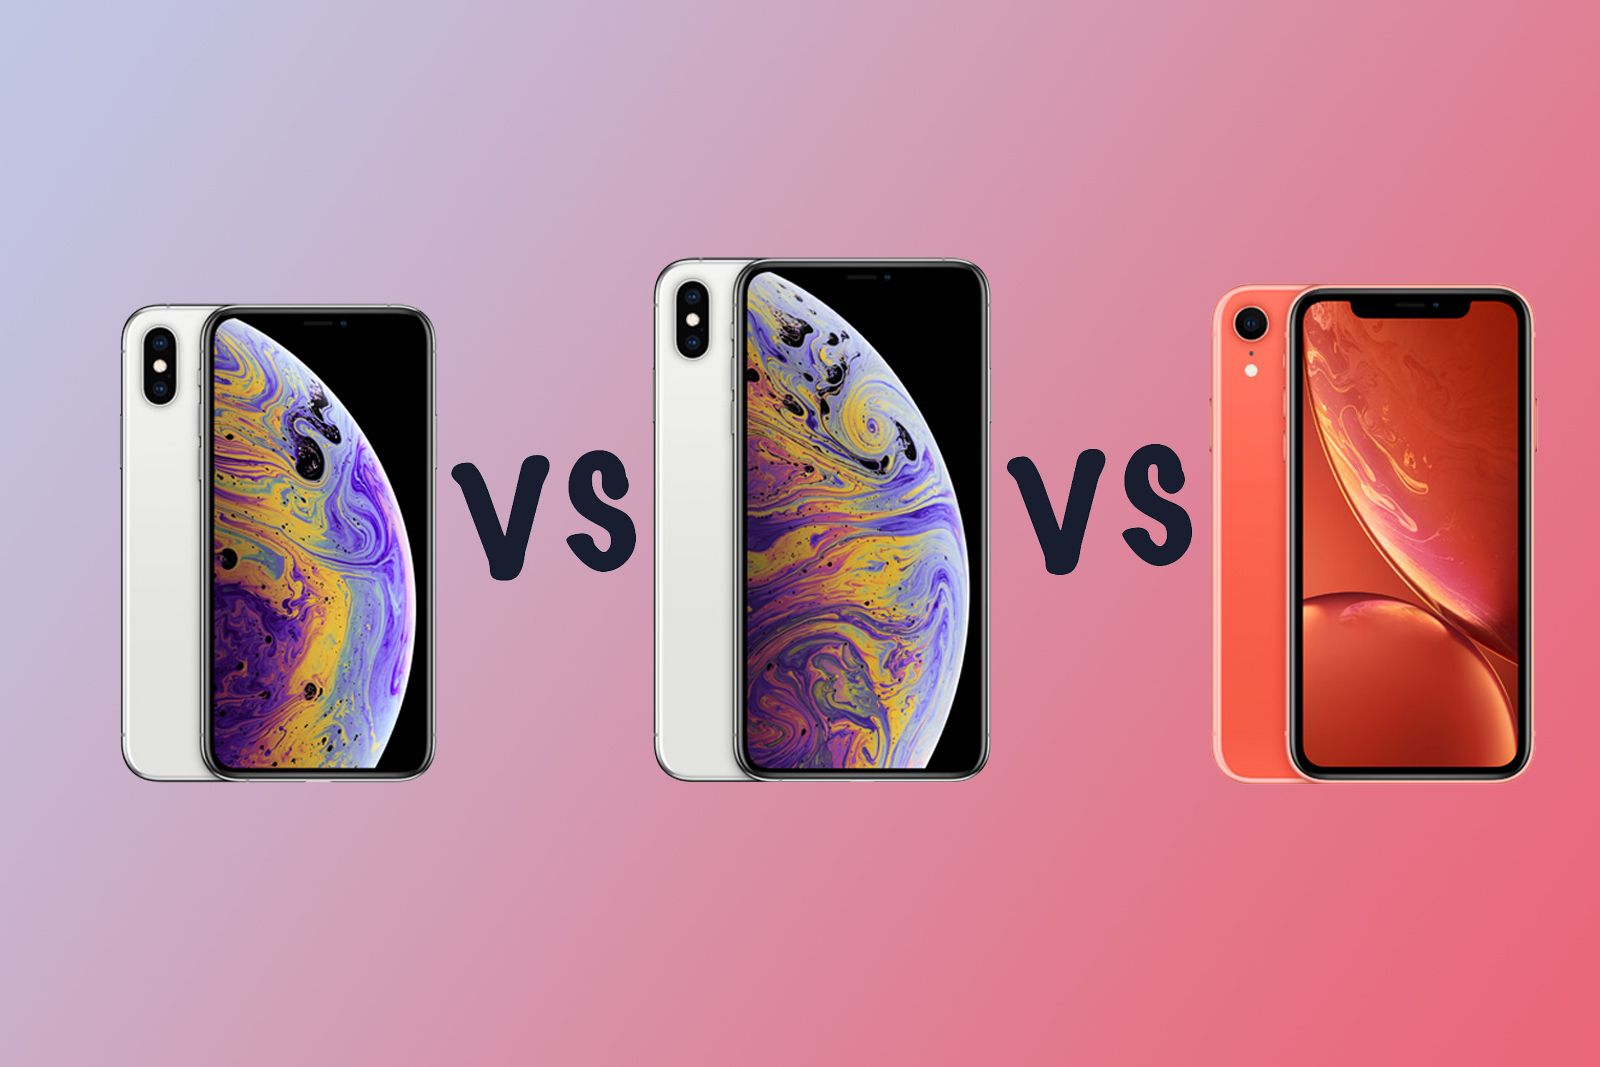 Apple Iphone Xs Vs Xs Plus Vs Iphone 9 Whats The Difference image 1